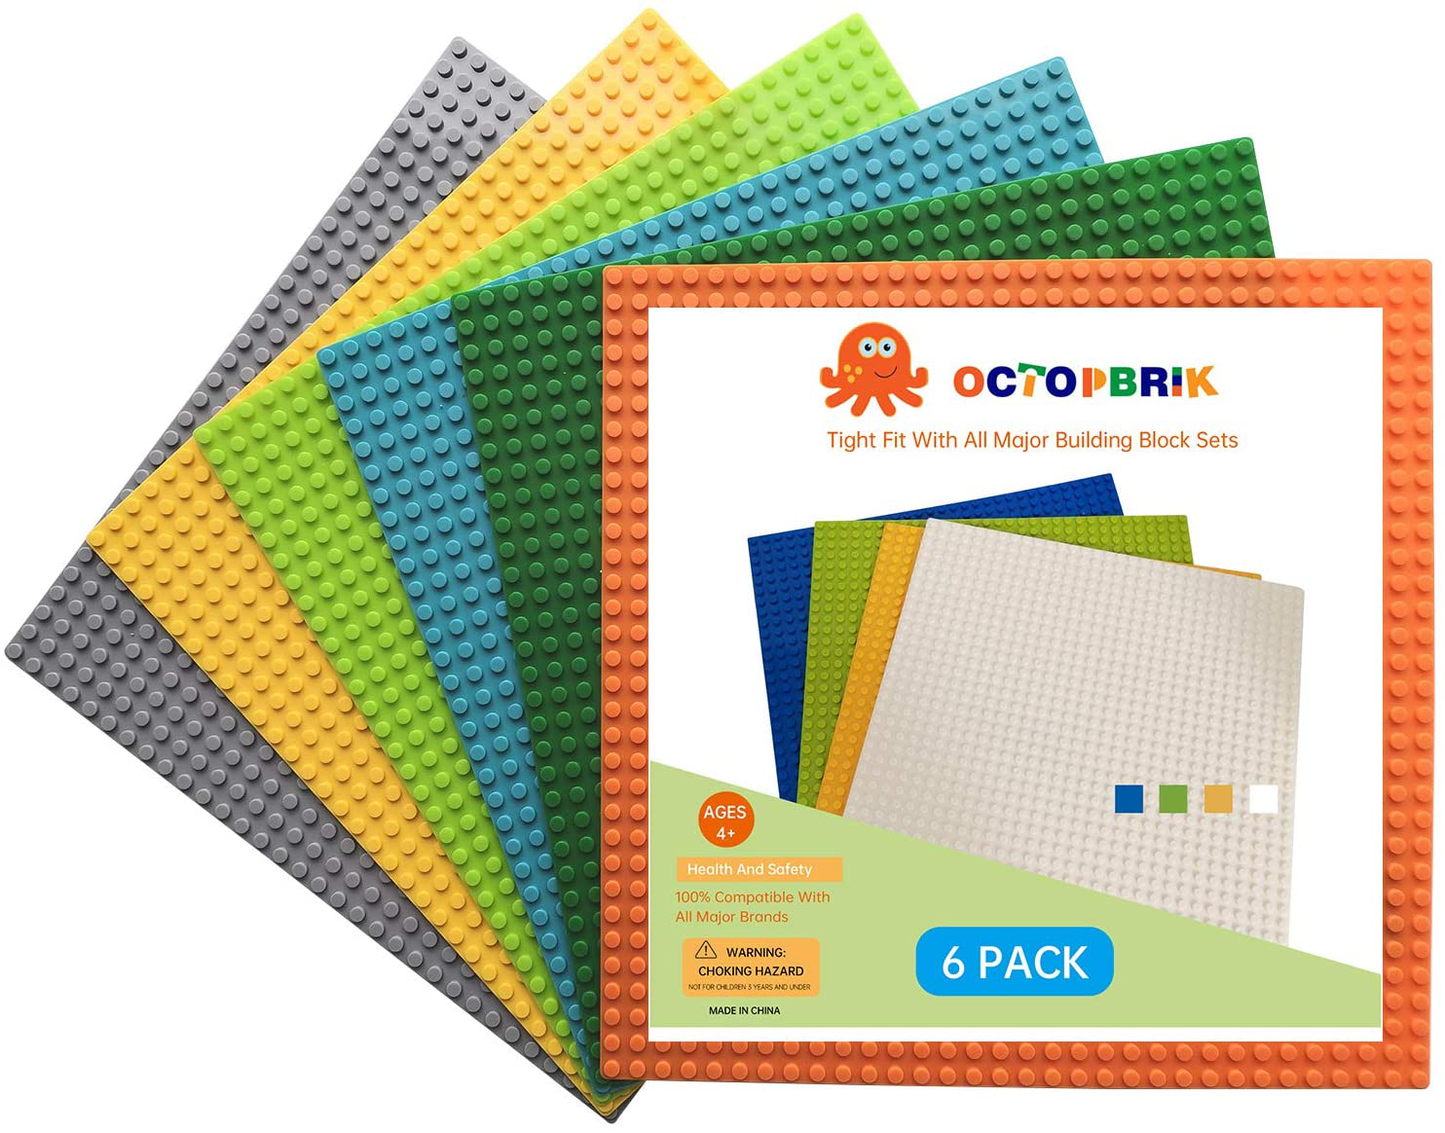 Octopbrik 6PCS Classic Baseplates, 10X10 Inches Base Plates, Compatible with Major Brands, 32X32 Pegs Large Platforms Accessory for Building Brick, Activity Table, and Displaying Toys (Multicolored)